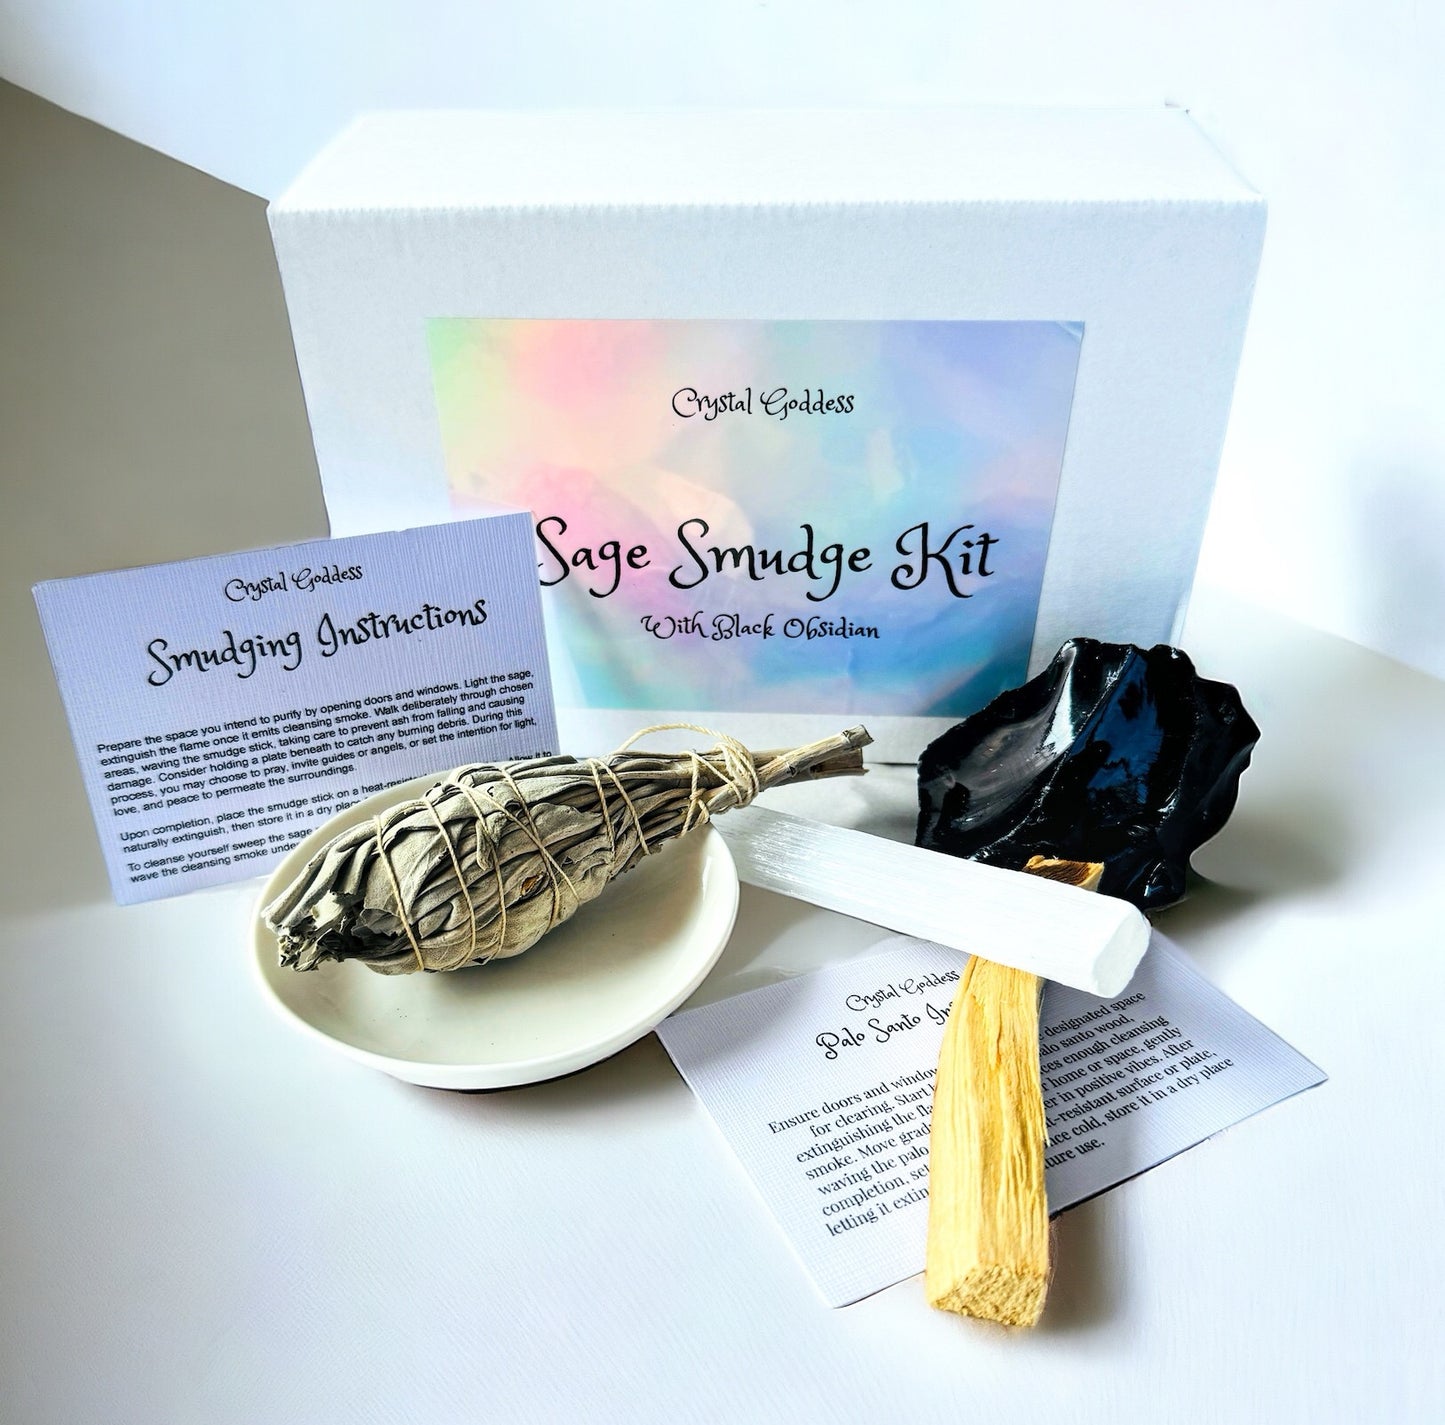 White Sage Smudge Kit With Obsidian.